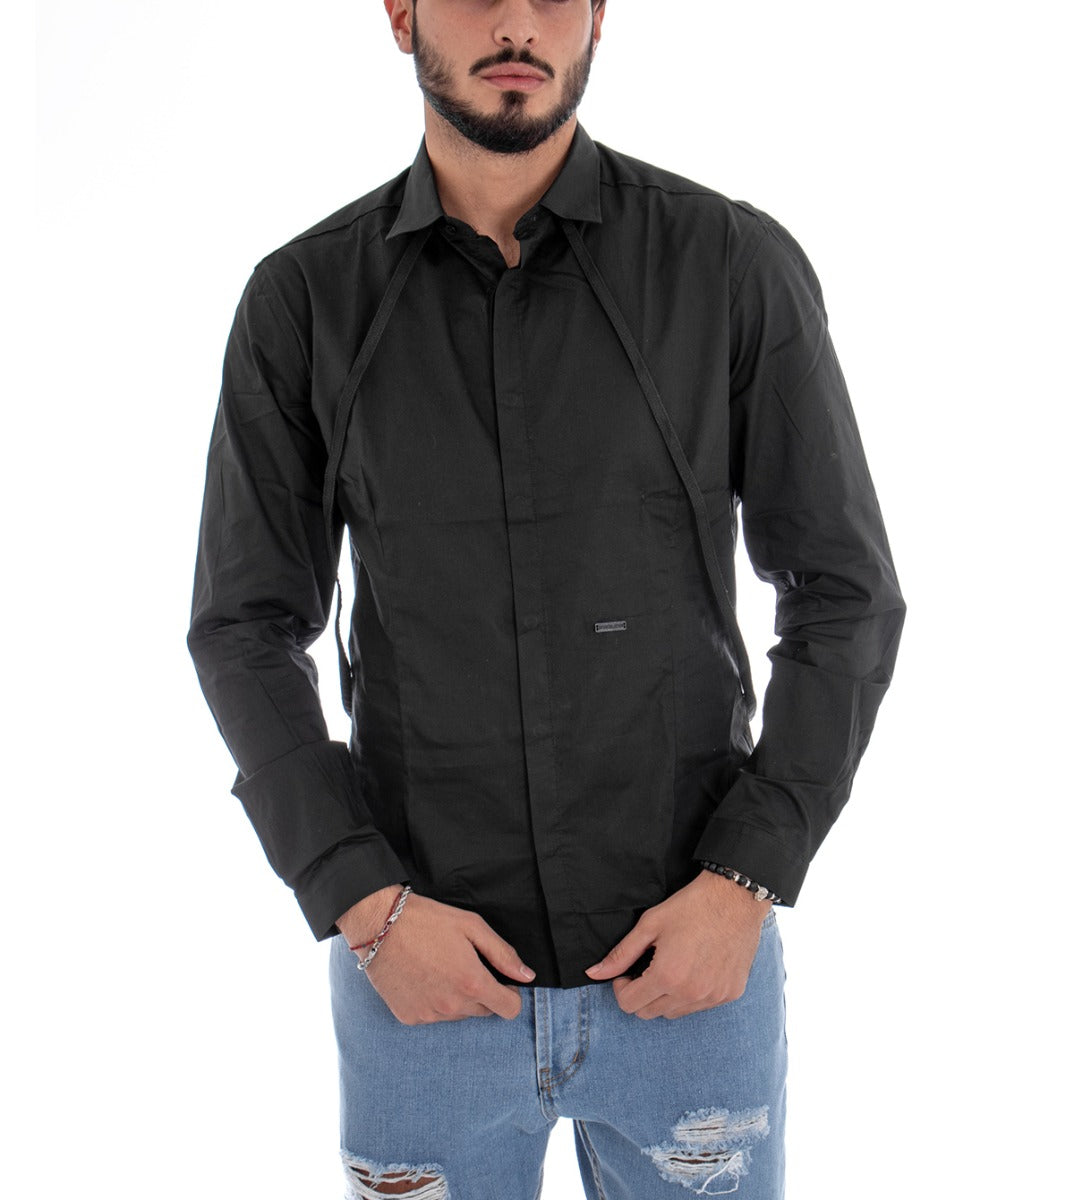 Men's Shirt With Collar Long Sleeve Slim Fit Casual Cotton Suspenders Black GIOSAL-C1453A 